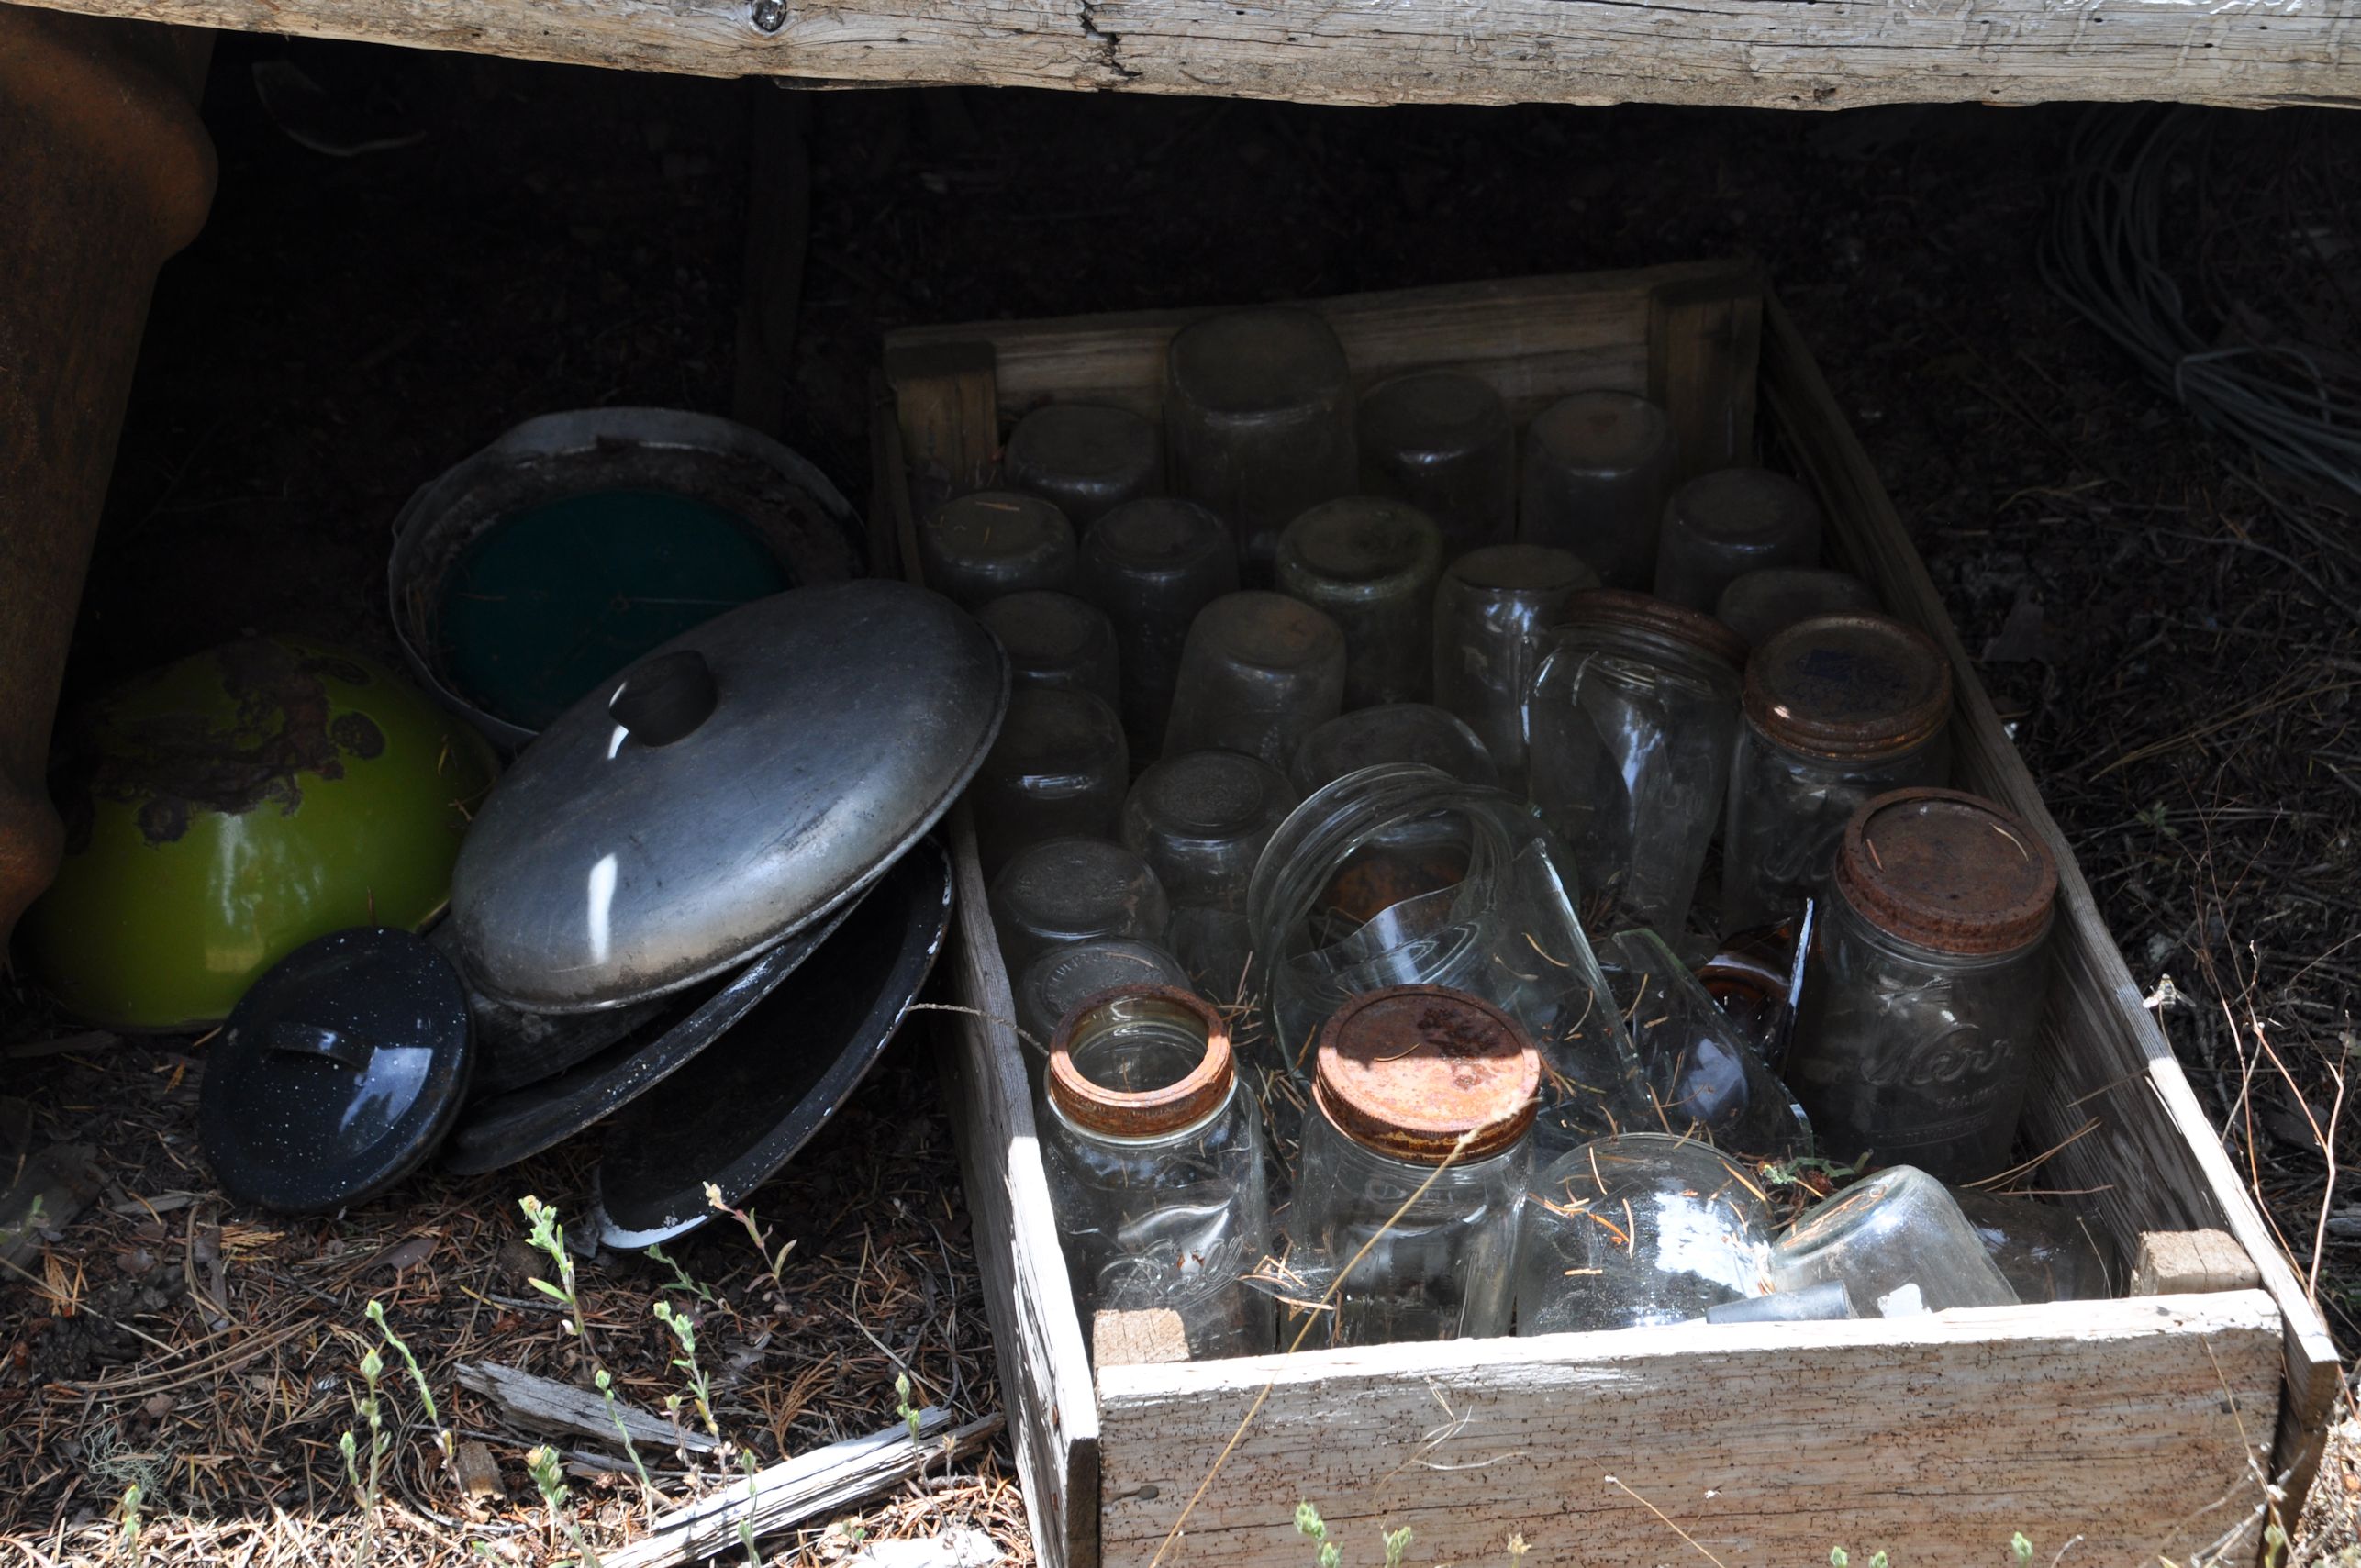 I can't tell you how deeply this image pulls at my heart. The canning jars and rusted pots out in a ramshackle shed because the house is too small, are a mirror of my childhood in north Idaho with my mom. 